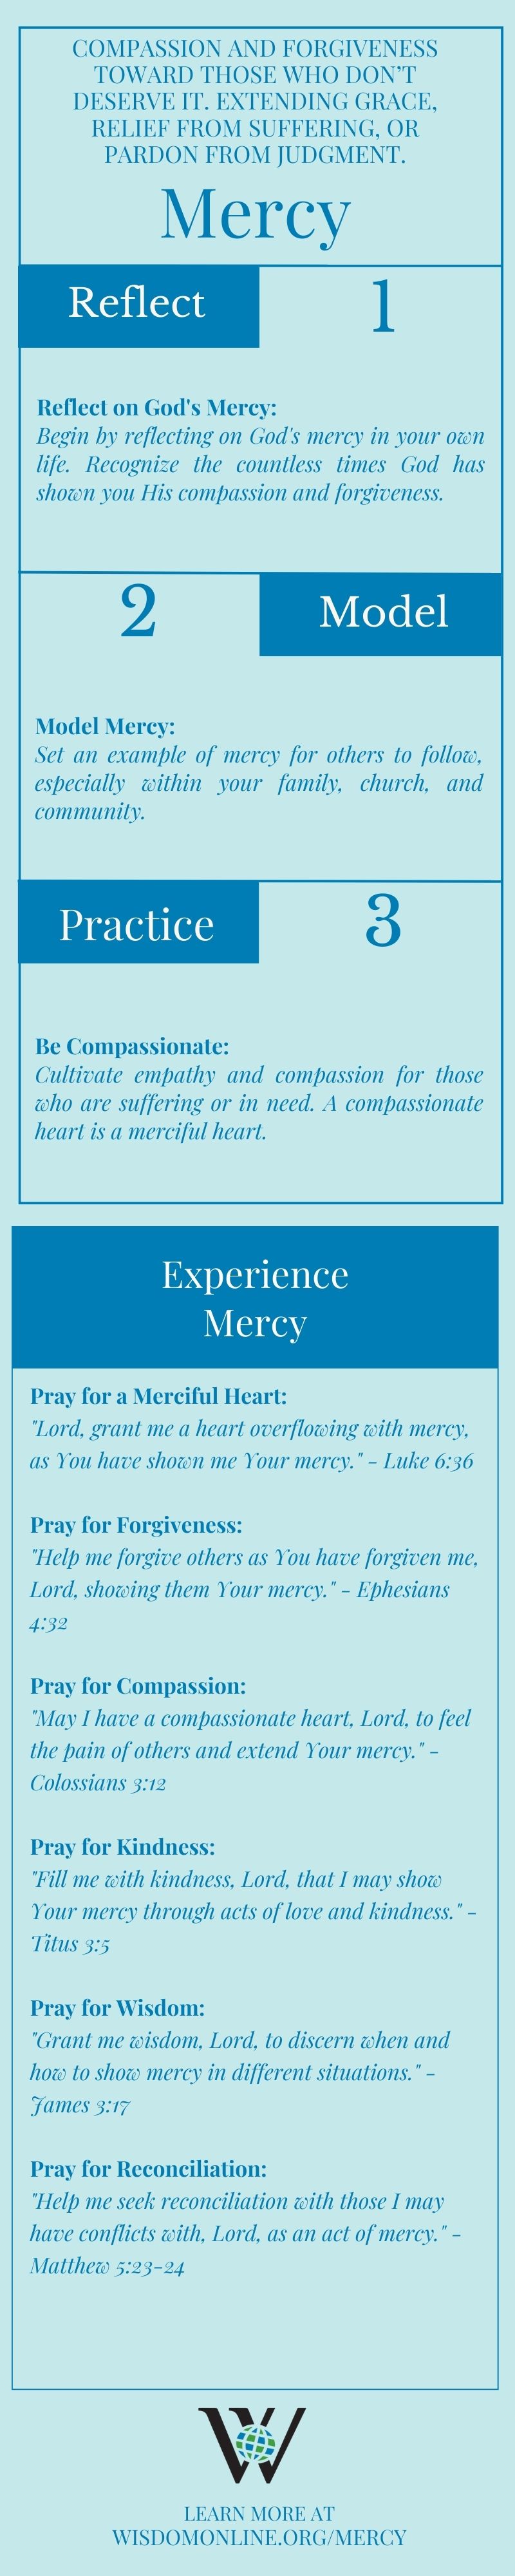 Infographic on the biblical quality of mercy.